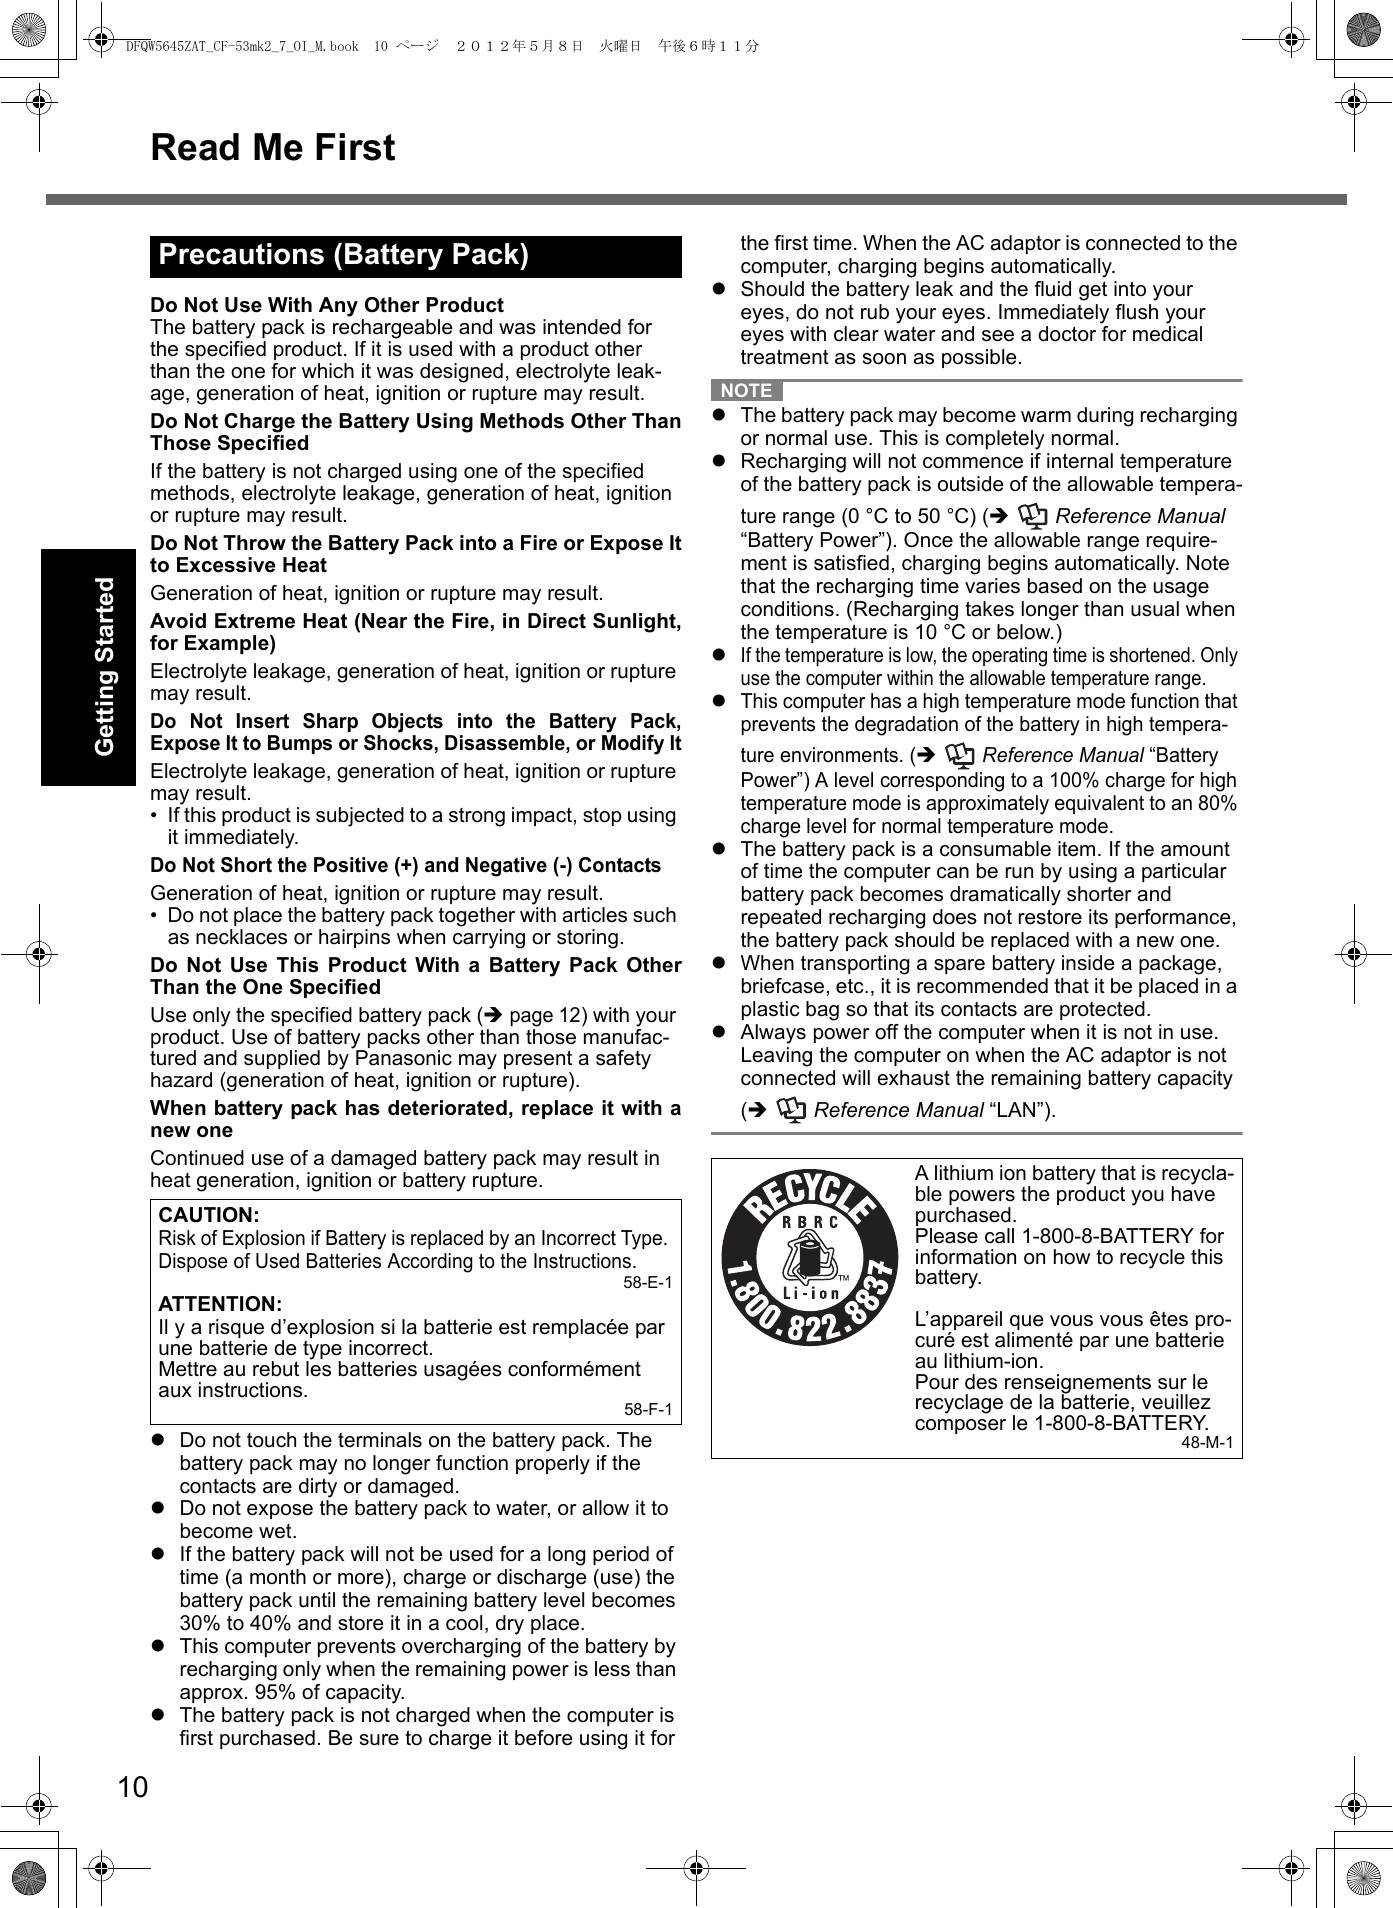 10Read Me FirstGetting StartedUseful InformationTroubleshootingAppendixDo Not Use With Any Other ProductThe battery pack is rechargeable and was intended for the specified product. If it is used with a product other than the one for which it was designed, electrolyte leak-age, generation of heat, ignition or rupture may result.Do Not Charge the Battery Using Methods Other ThanThose SpecifiedIf the battery is not charged using one of the specified methods, electrolyte leakage, generation of heat, ignition or rupture may result.Do Not Throw the Battery Pack into a Fire or Expose Itto Excessive HeatGeneration of heat, ignition or rupture may result.Avoid Extreme Heat (Near the Fire, in Direct Sunlight,for Example)Electrolyte leakage, generation of heat, ignition or rupture may result.Do Not Insert Sharp Objects into the Battery Pack,Expose It to Bumps or Shocks, Disassemble, or Modify ItElectrolyte leakage, generation of heat, ignition or rupture may result.• If this product is subjected to a strong impact, stop using it immediately.Do Not Short the Positive (+) and Negative (-) ContactsGeneration of heat, ignition or rupture may result. • Do not place the battery pack together with articles such as necklaces or hairpins when carrying or storing.Do Not Use This Product With a Battery Pack OtherThan the One SpecifiedUse only the specified battery pack (Î page 12) with your product. Use of battery packs other than those manufac-tured and supplied by Panasonic may present a safety hazard (generation of heat, ignition or rupture).When battery pack has deteriorated, replace it with anew oneContinued use of a damaged battery pack may result in heat generation, ignition or battery rupture.zDo not touch the terminals on the battery pack. The battery pack may no longer function properly if the contacts are dirty or damaged.zDo not expose the battery pack to water, or allow it to become wet.zIf the battery pack will not be used for a long period of time (a month or more), charge or discharge (use) the battery pack until the remaining battery level becomes 30% to 40% and store it in a cool, dry place.zThis computer prevents overcharging of the battery by recharging only when the remaining power is less than approx. 95% of capacity.zThe battery pack is not charged when the computer is first purchased. Be sure to charge it before using it for the first time. When the AC adaptor is connected to the computer, charging begins automatically.zShould the battery leak and the fluid get into your eyes, do not rub your eyes. Immediately flush your eyes with clear water and see a doctor for medical treatment as soon as possible.NOTEzThe battery pack may become warm during recharging or normal use. This is completely normal.zRecharging will not commence if internal temperature of the battery pack is outside of the allowable tempera-ture range (0 °C to 50 °C) (Î  Reference Manual “Battery Power”). Once the allowable range require-ment is satisfied, charging begins automatically. Note that the recharging time varies based on the usage conditions. (Recharging takes longer than usual when the temperature is 10 °C or below.)zIf the temperature is low, the operating time is shortened. Only use the computer within the allowable temperature range.zThis computer has a high temperature mode function that prevents the degradation of the battery in high tempera-ture environments. (Î  Reference Manual “Battery Power”) A level corresponding to a 100% charge for high temperature mode is approximately equivalent to an 80% charge level for normal temperature mode. zThe battery pack is a consumable item. If the amount of time the computer can be run by using a particular battery pack becomes dramatically shorter and repeated recharging does not restore its performance, the battery pack should be replaced with a new one.zWhen transporting a spare battery inside a package, briefcase, etc., it is recommended that it be placed in a plastic bag so that its contacts are protected.zAlways power off the computer when it is not in use. Leaving the computer on when the AC adaptor is not connected will exhaust the remaining battery capacity (Î  Reference Manual “LAN”).Precautions (Battery Pack)CAUTION:Risk of Explosion if Battery is replaced by an Incorrect Type. Dispose of Used Batteries According to the Instructions.58-E-1ATTENTION:Il y a risque d’explosion si la batterie est remplacée par une batterie de type incorrect.Mettre au rebut les batteries usagées conformément aux instructions. 58-F-1A lithium ion battery that is recycla-ble powers the product you have purchased.Please call 1-800-8-BATTERY for information on how to recycle this battery.L’appareil que vous vous êtes pro-curé est alimenté par une batterie au lithium-ion.Pour des renseignements sur le recyclage de la batterie, veuillez composer le 1-800-8-BATTERY.48-M-1DFQW5645ZAT_CF-53mk2_7_OI_M.book  10 ページ  ２０１２年５月８日　火曜日　午後６時１１分